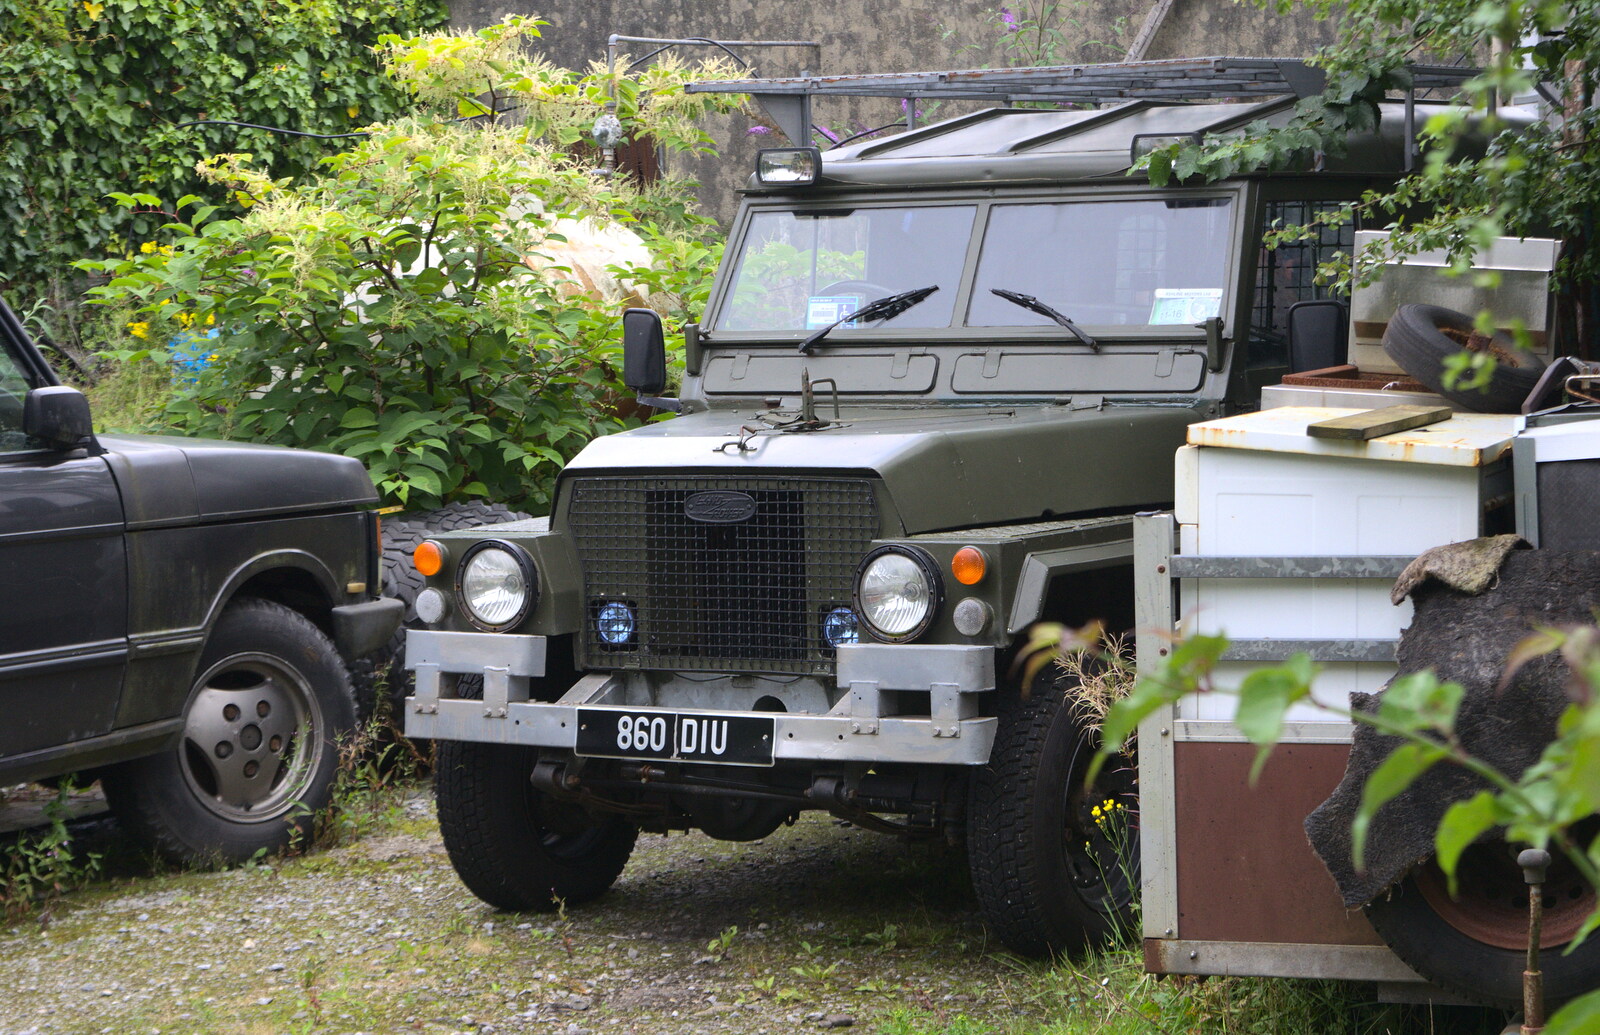 Another Land Rover, in olive drab from A Seafari Boat Trip, Kenmare, Kerry, Ireland - 3rd August 2017